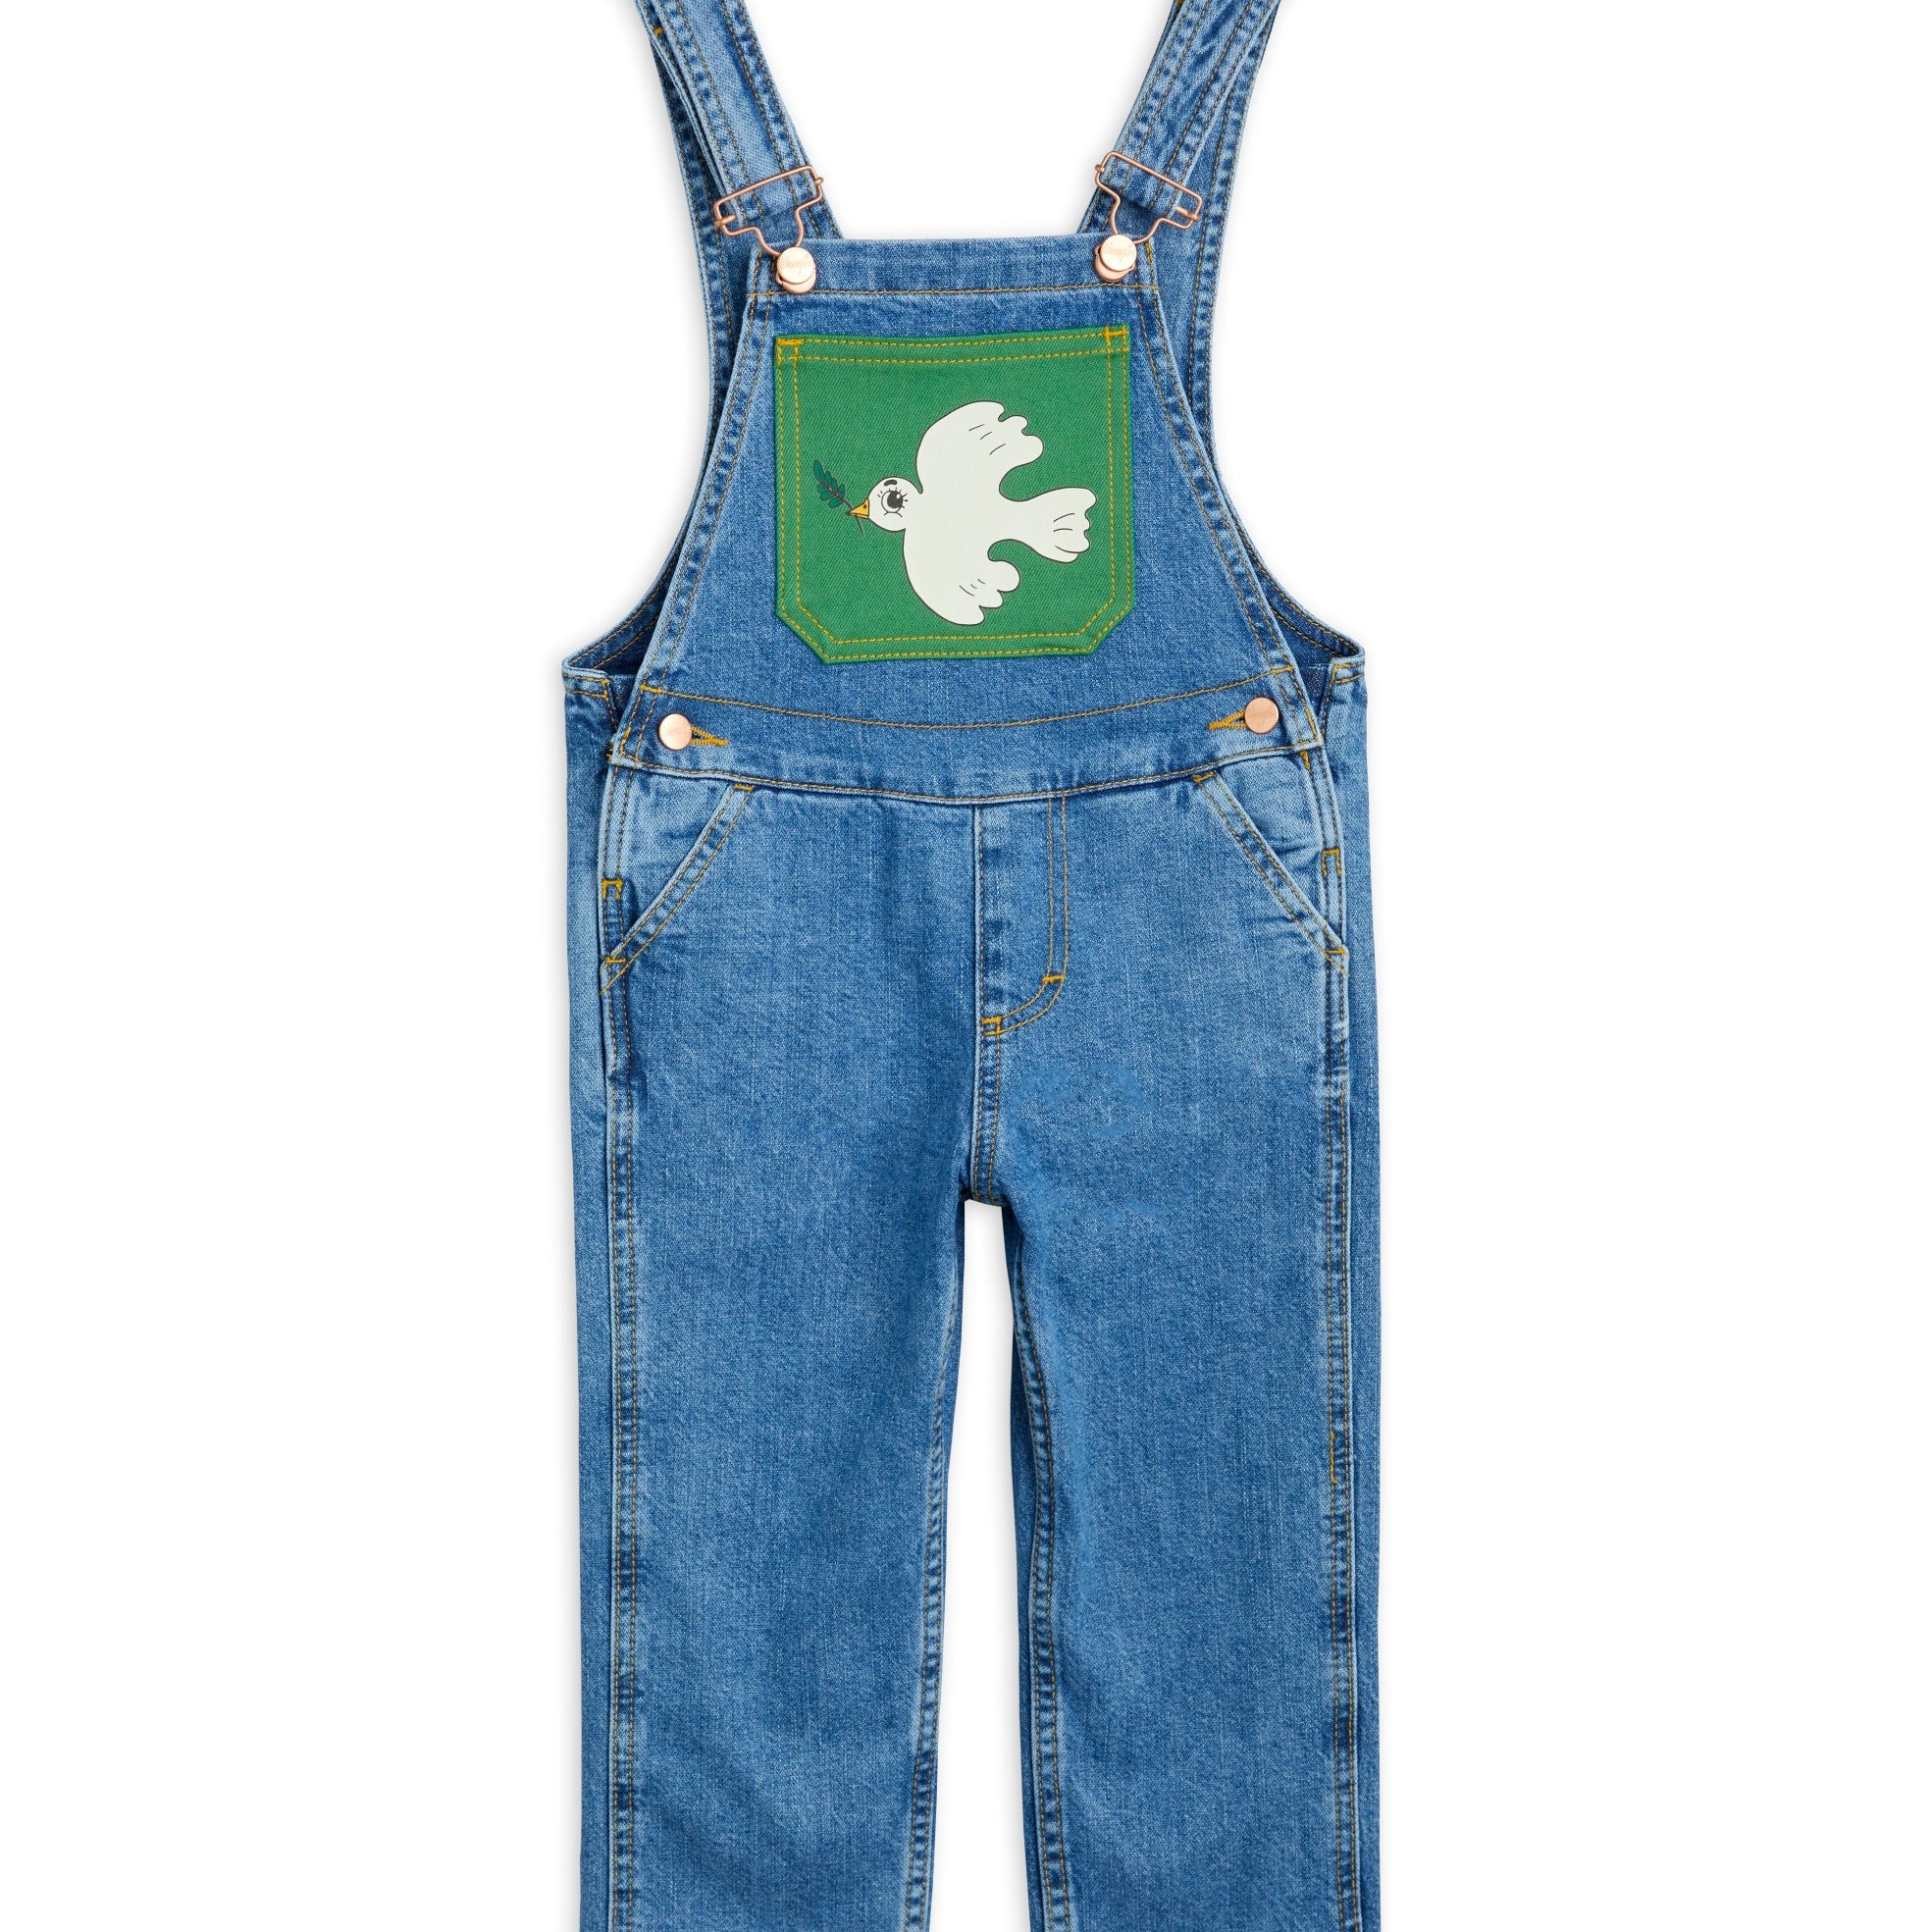 Mini Rodini and Wrangler denim overalls with green patch pocket and white dove print.